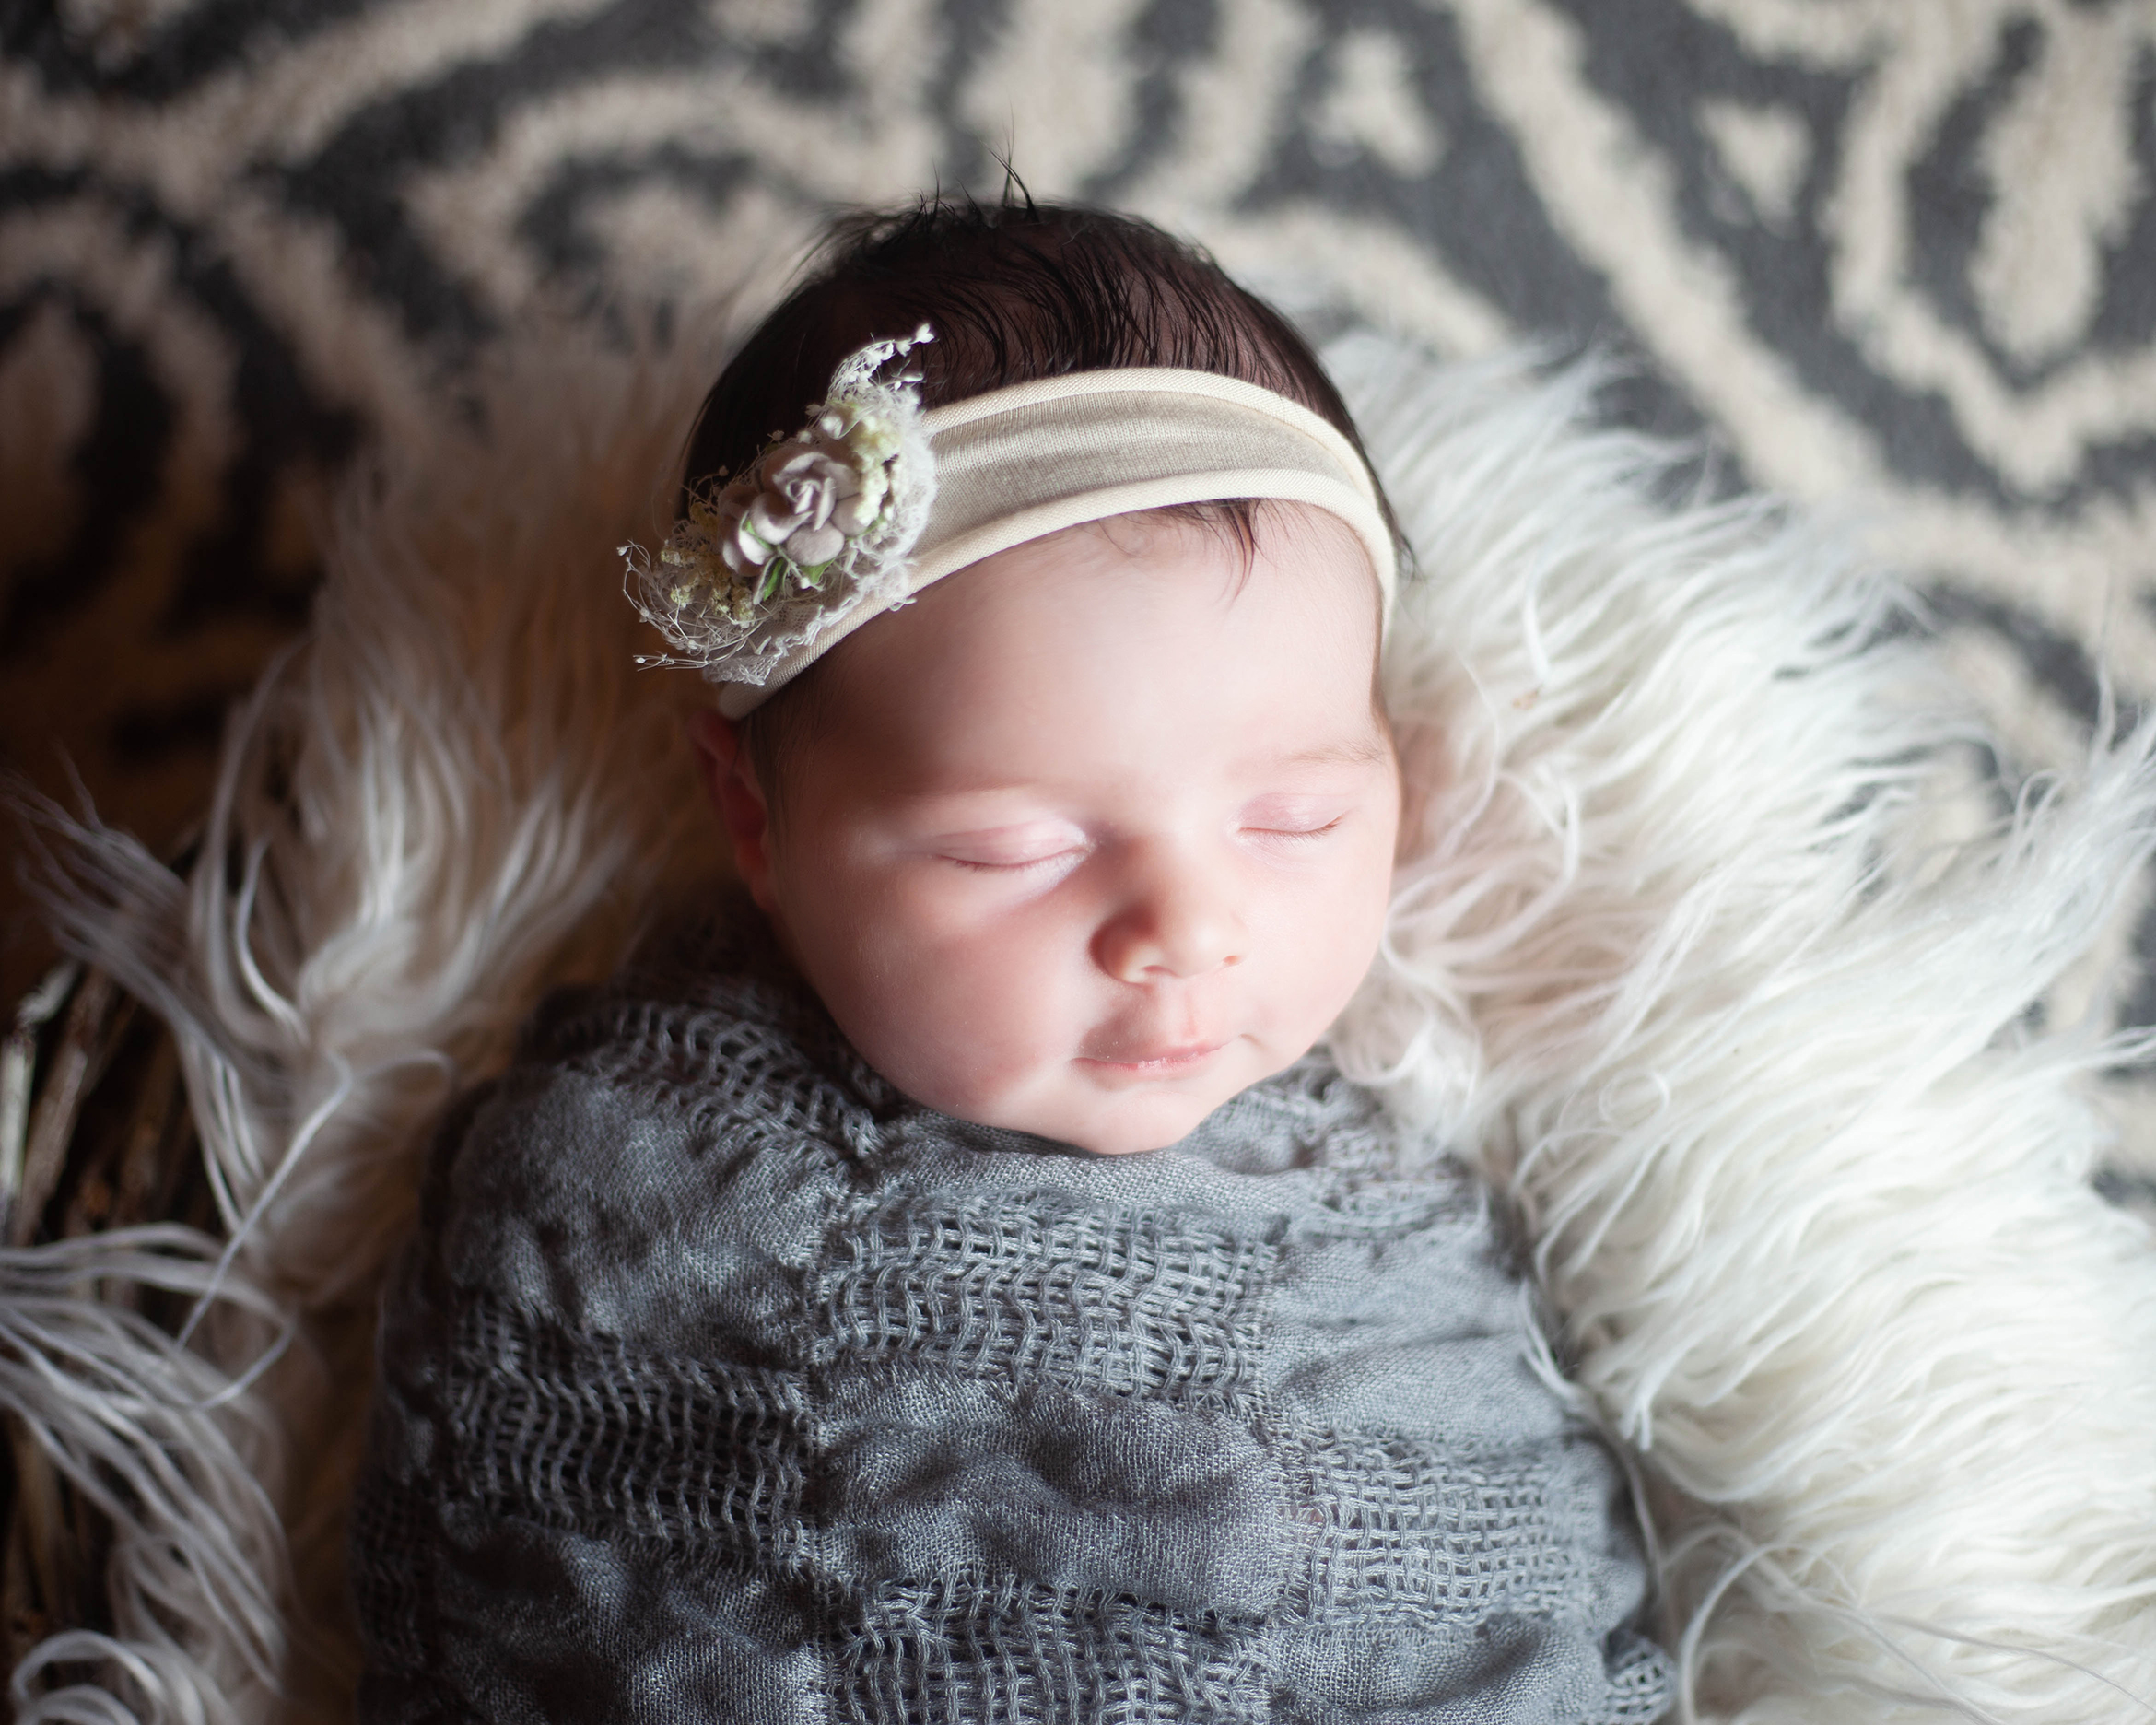 How to prepare for an In- Home Newborn Photo Shoot